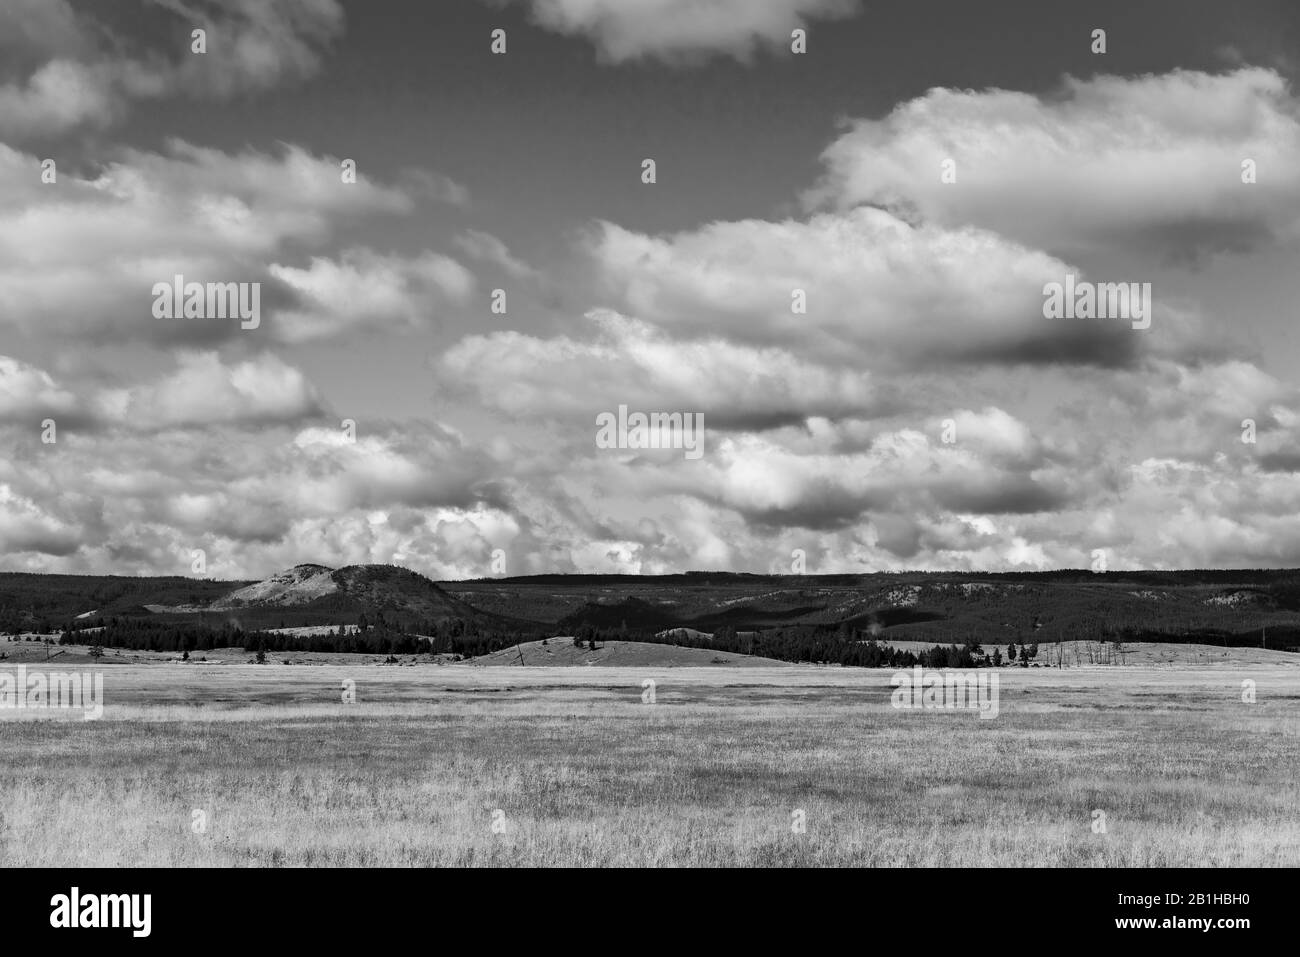 Black and white, fields of grain with hills and mountains beyond. White fluffy clouds in the sky. Stock Photo